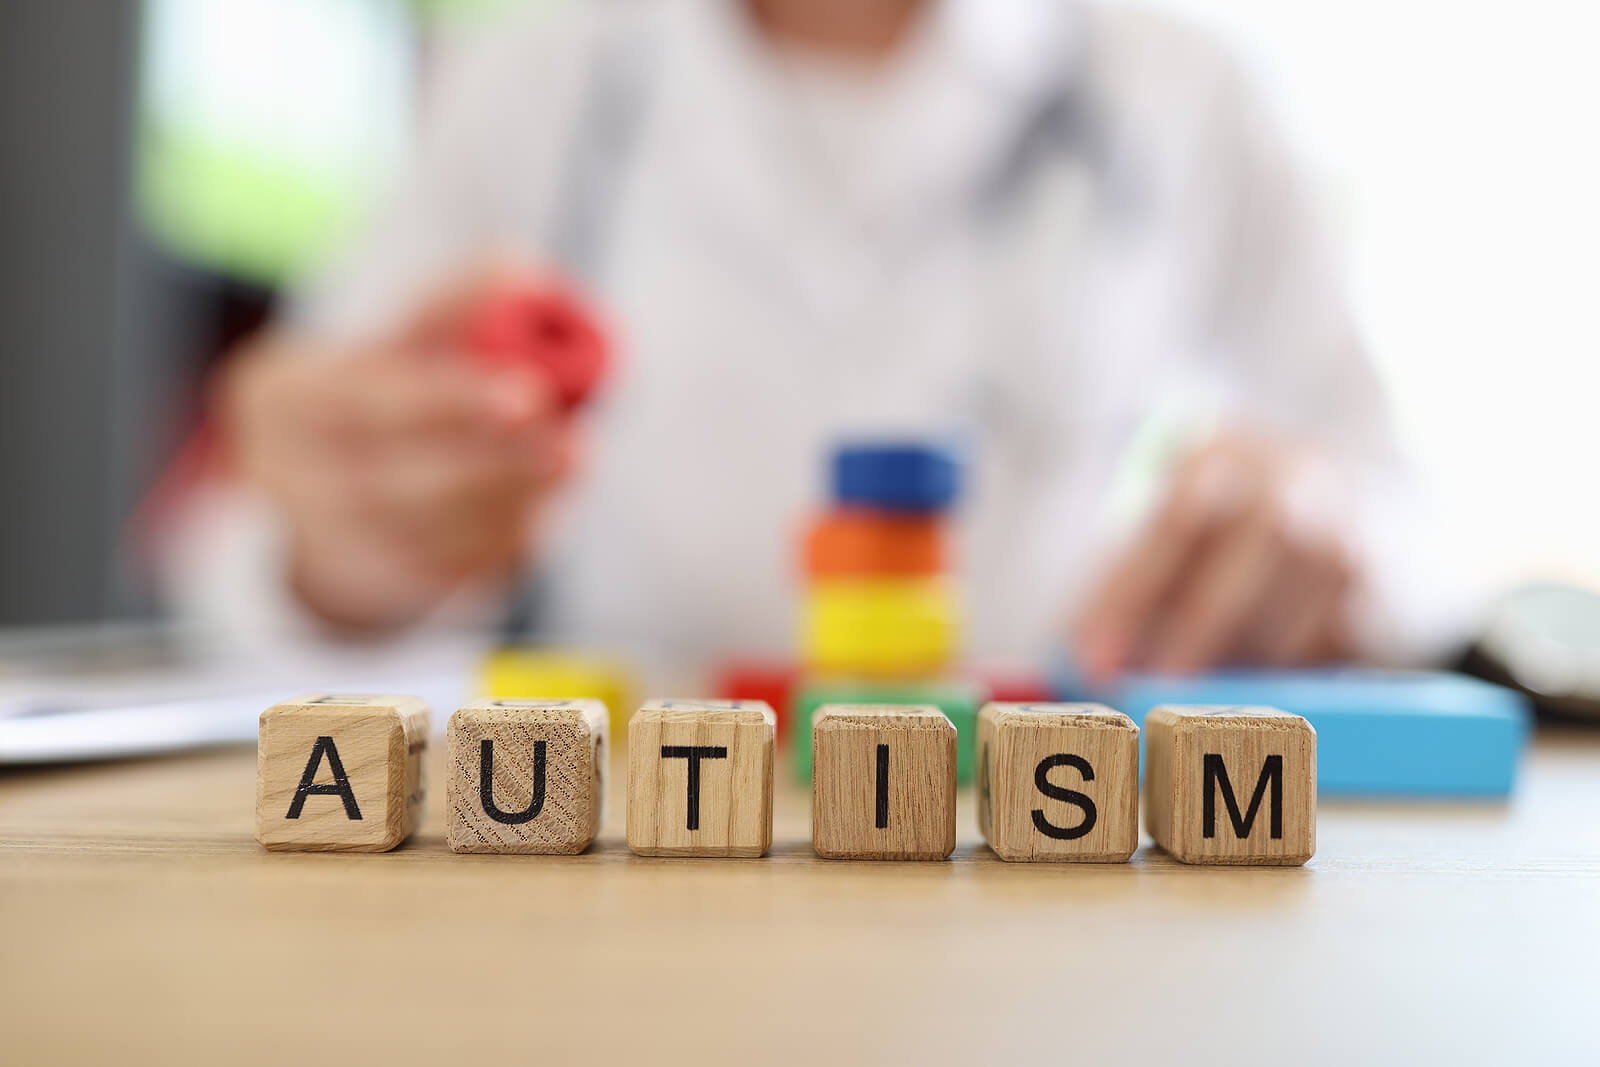 Autism spelled out on wooden blocks. If you are looking for a neurodevelopmental or autism testing, contact us! Our psychiatrists are here for you.